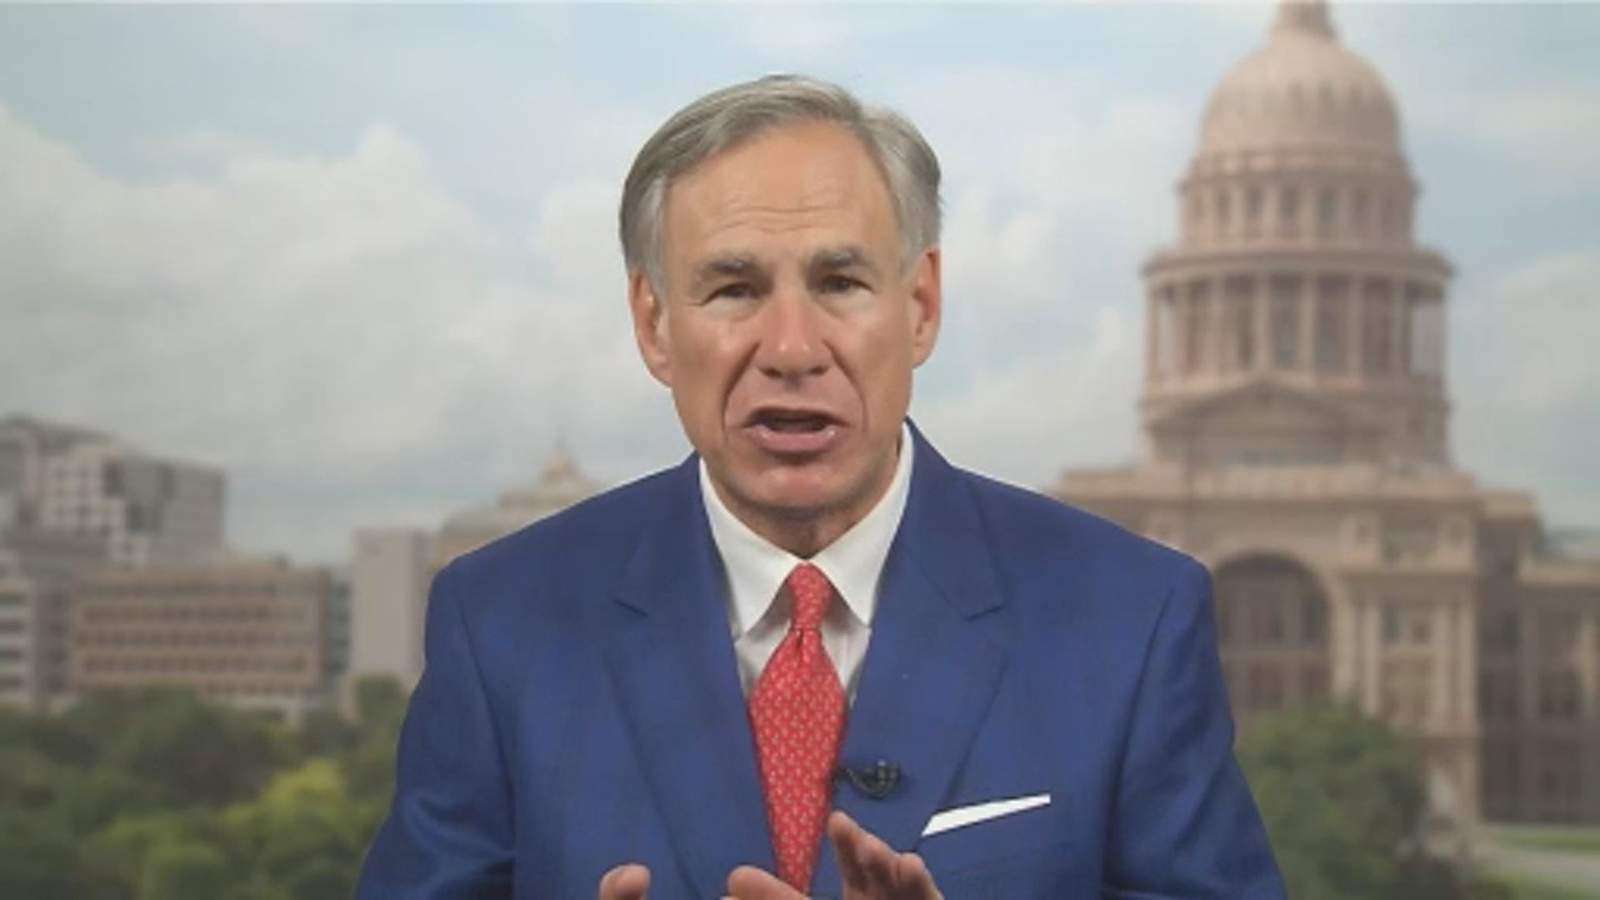 Governor Greg Abbott announces Phase III of reopening Texas